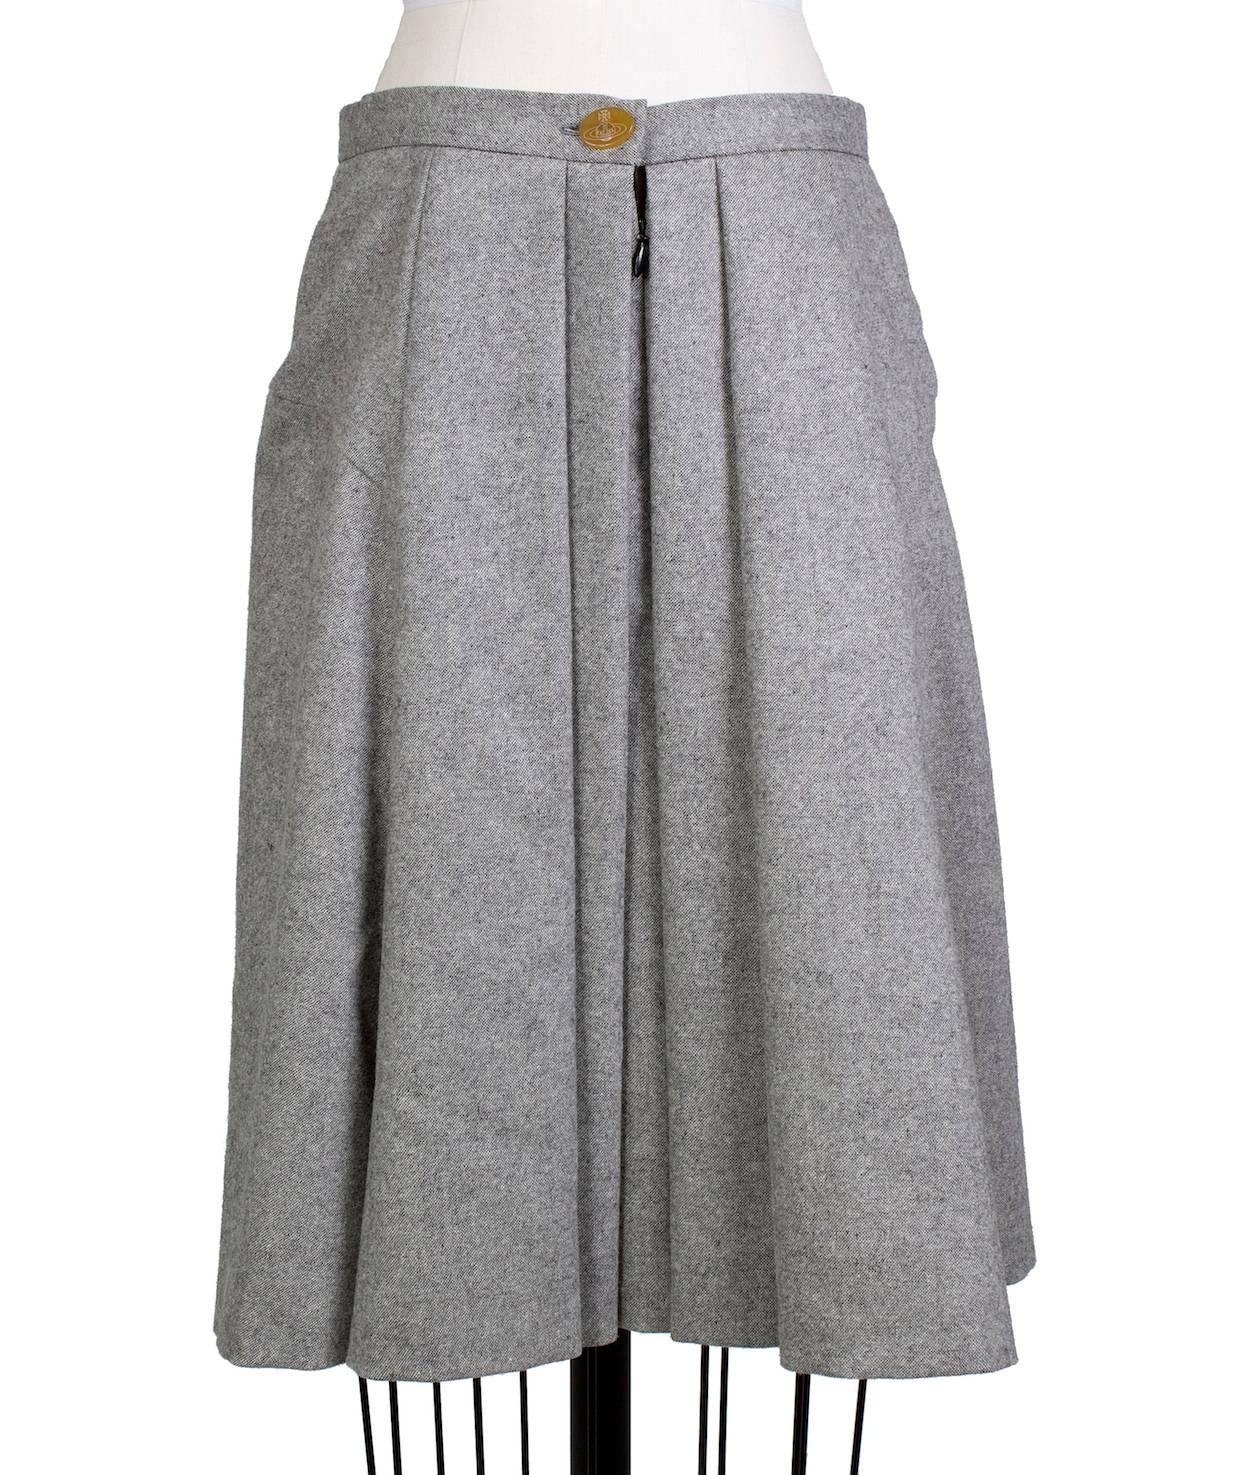 Gray Vivienne Westwood Skirt and Jacket